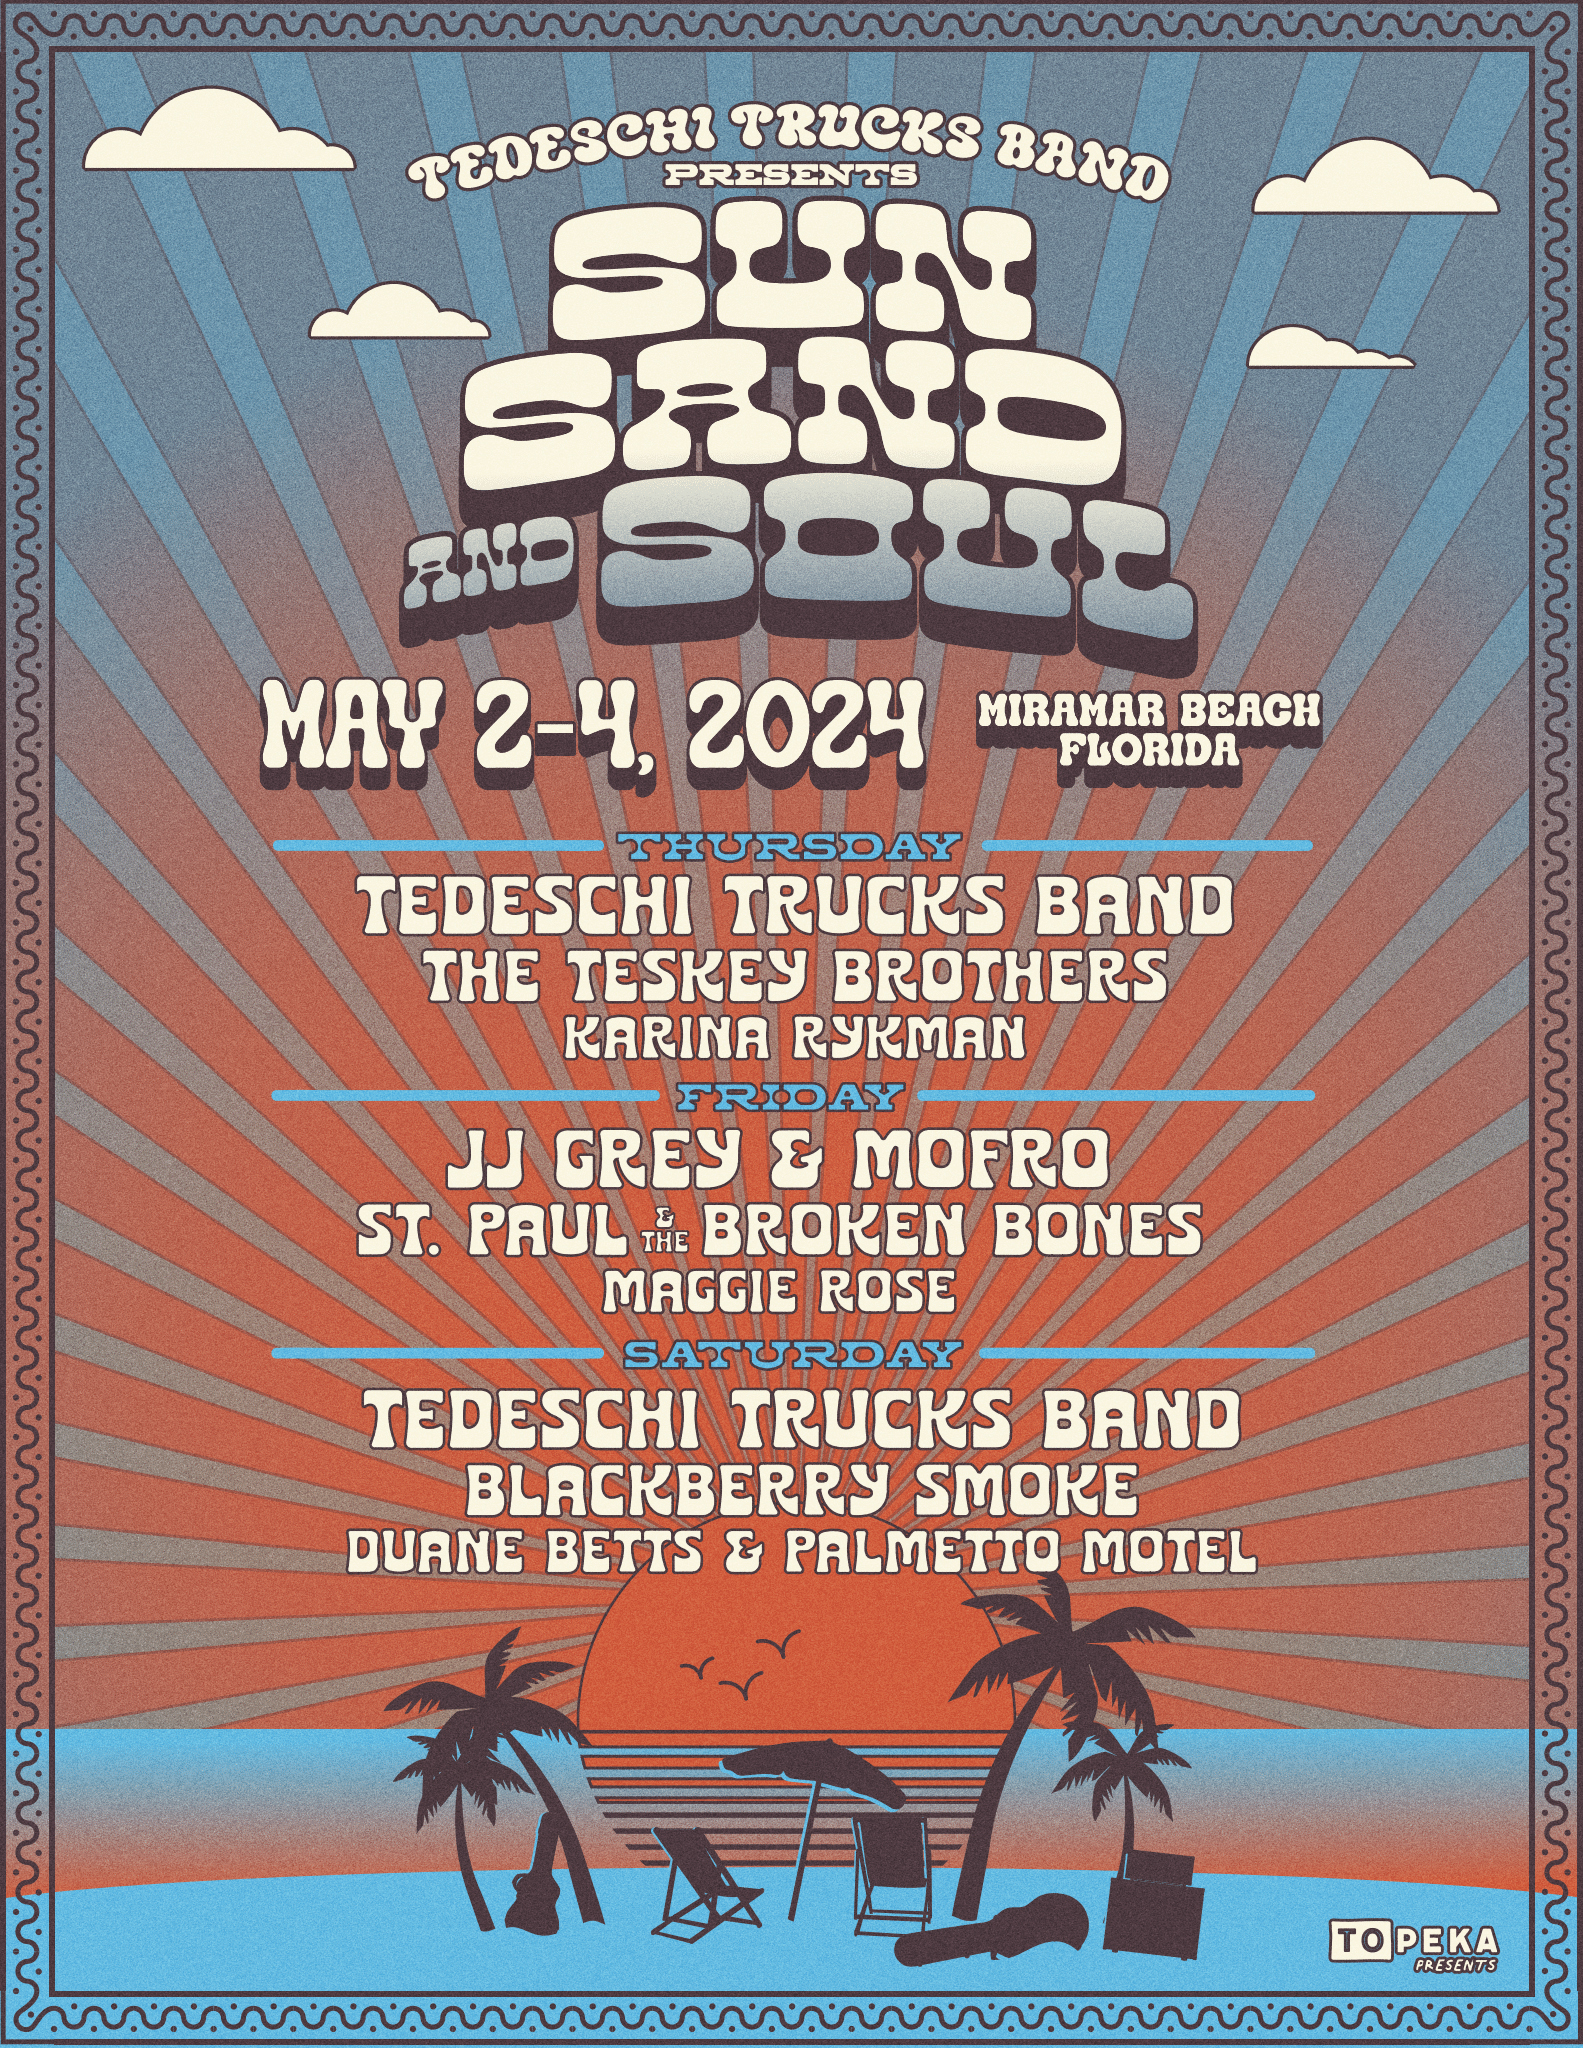 Experience the Ultimate Music Vacation: Topeka's Sun, Sand and Soul Weekend with Tedeschi Trucks Band